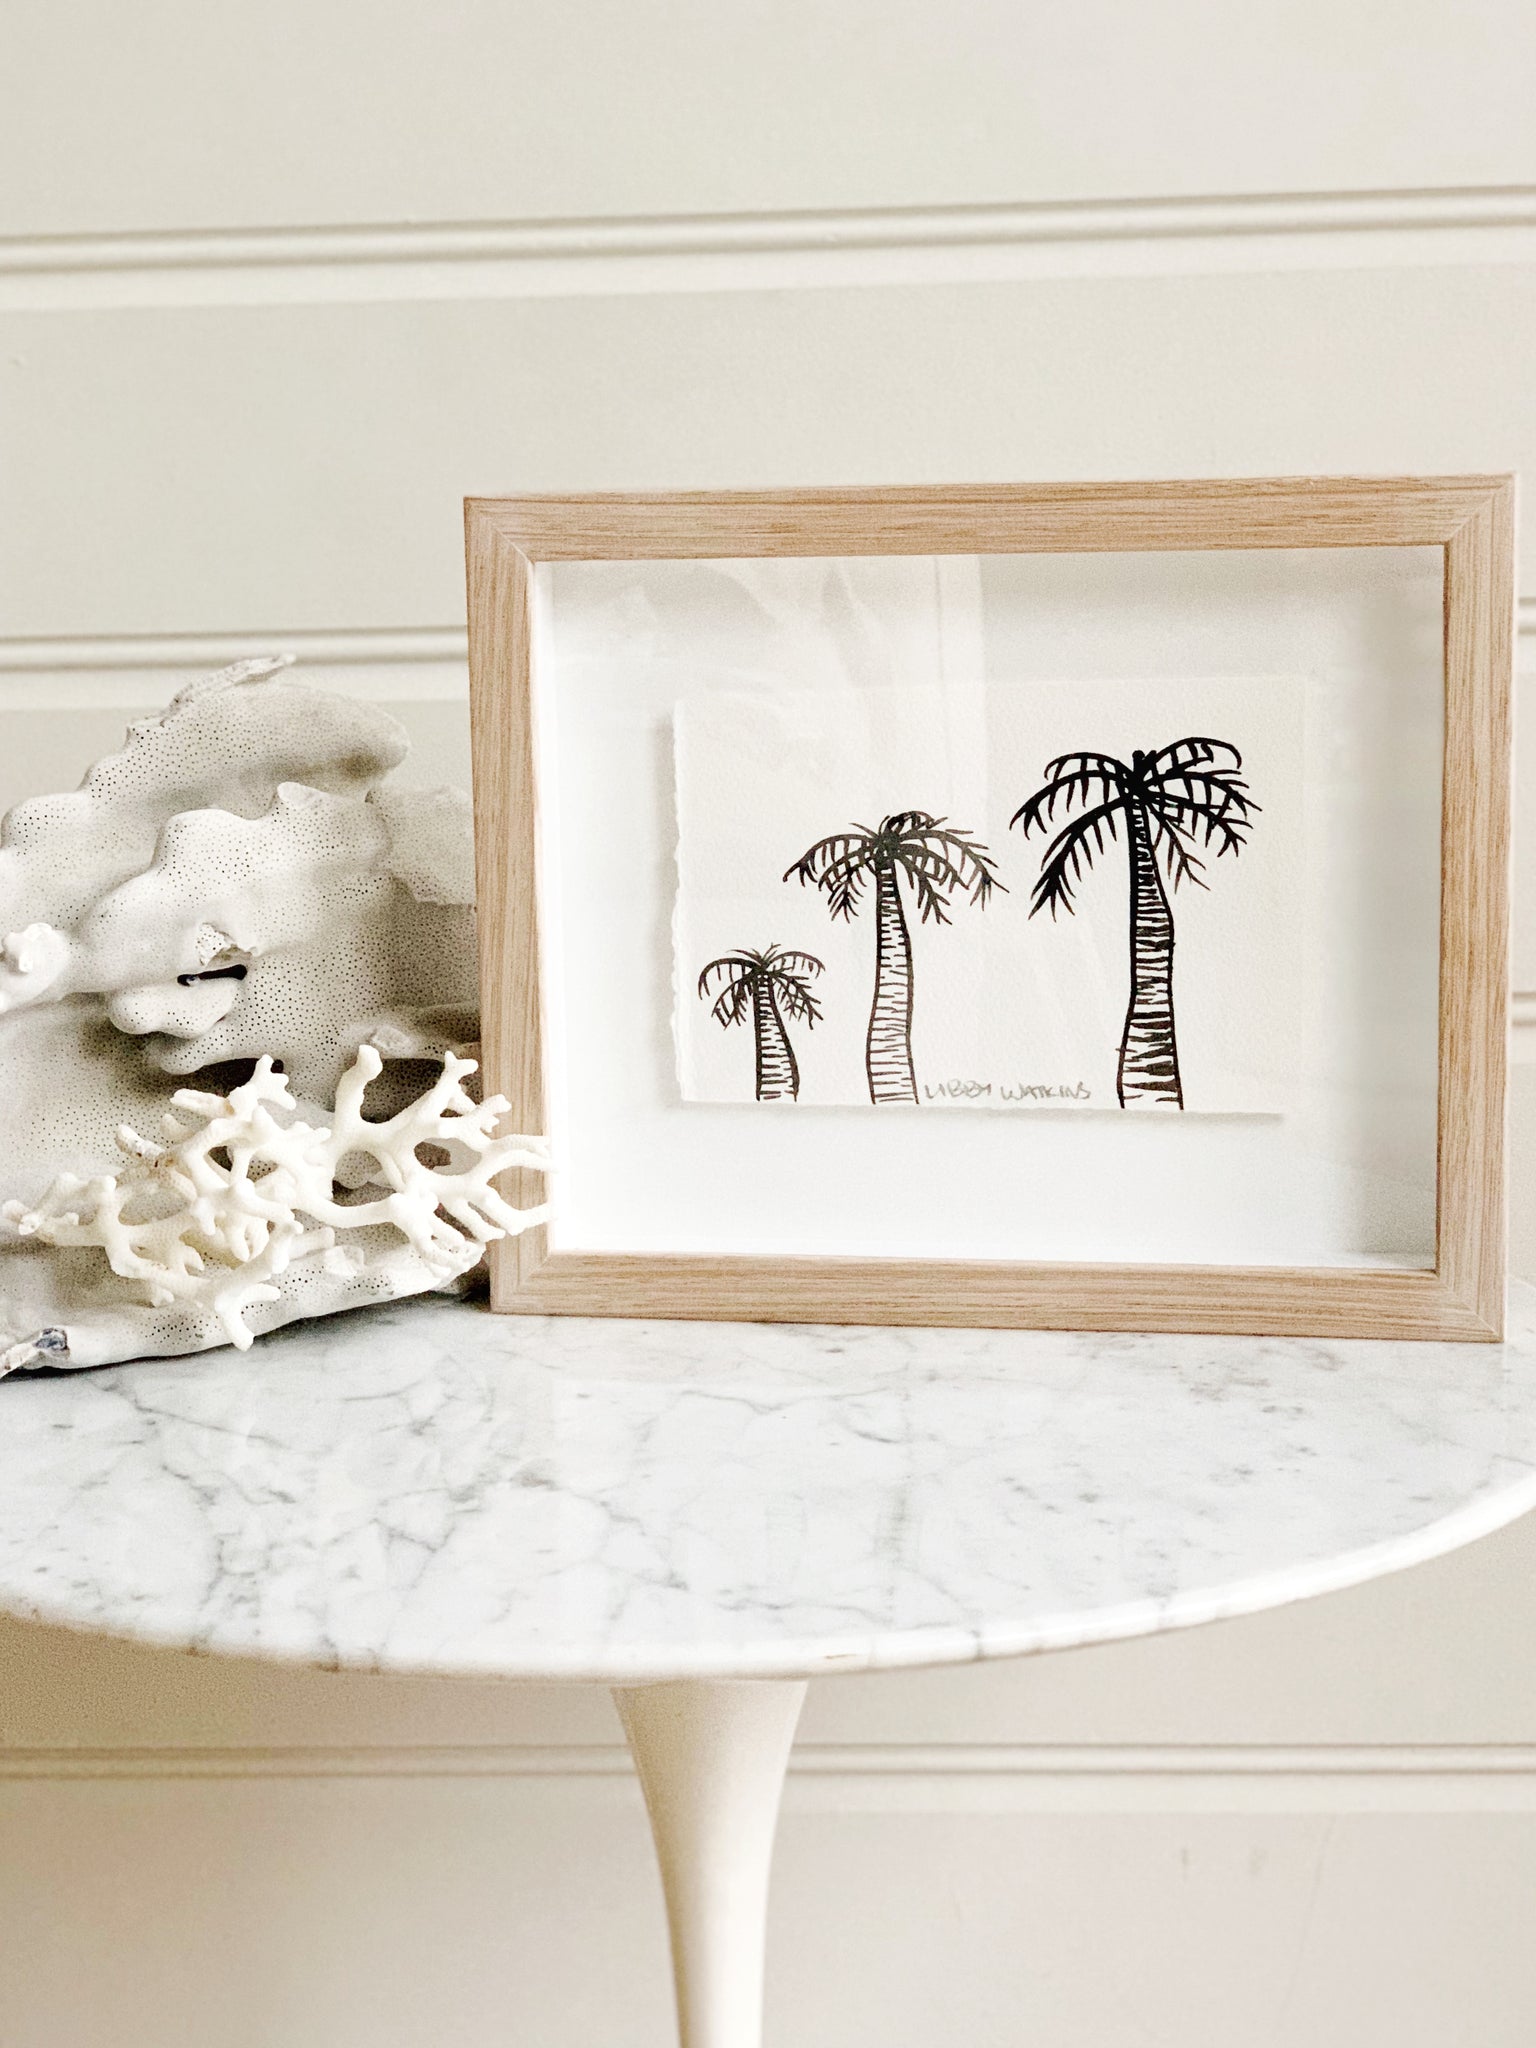 Signature Libby Watkins | Mini Ink Palm | 91809 | Made to order with artist Libby Watkins